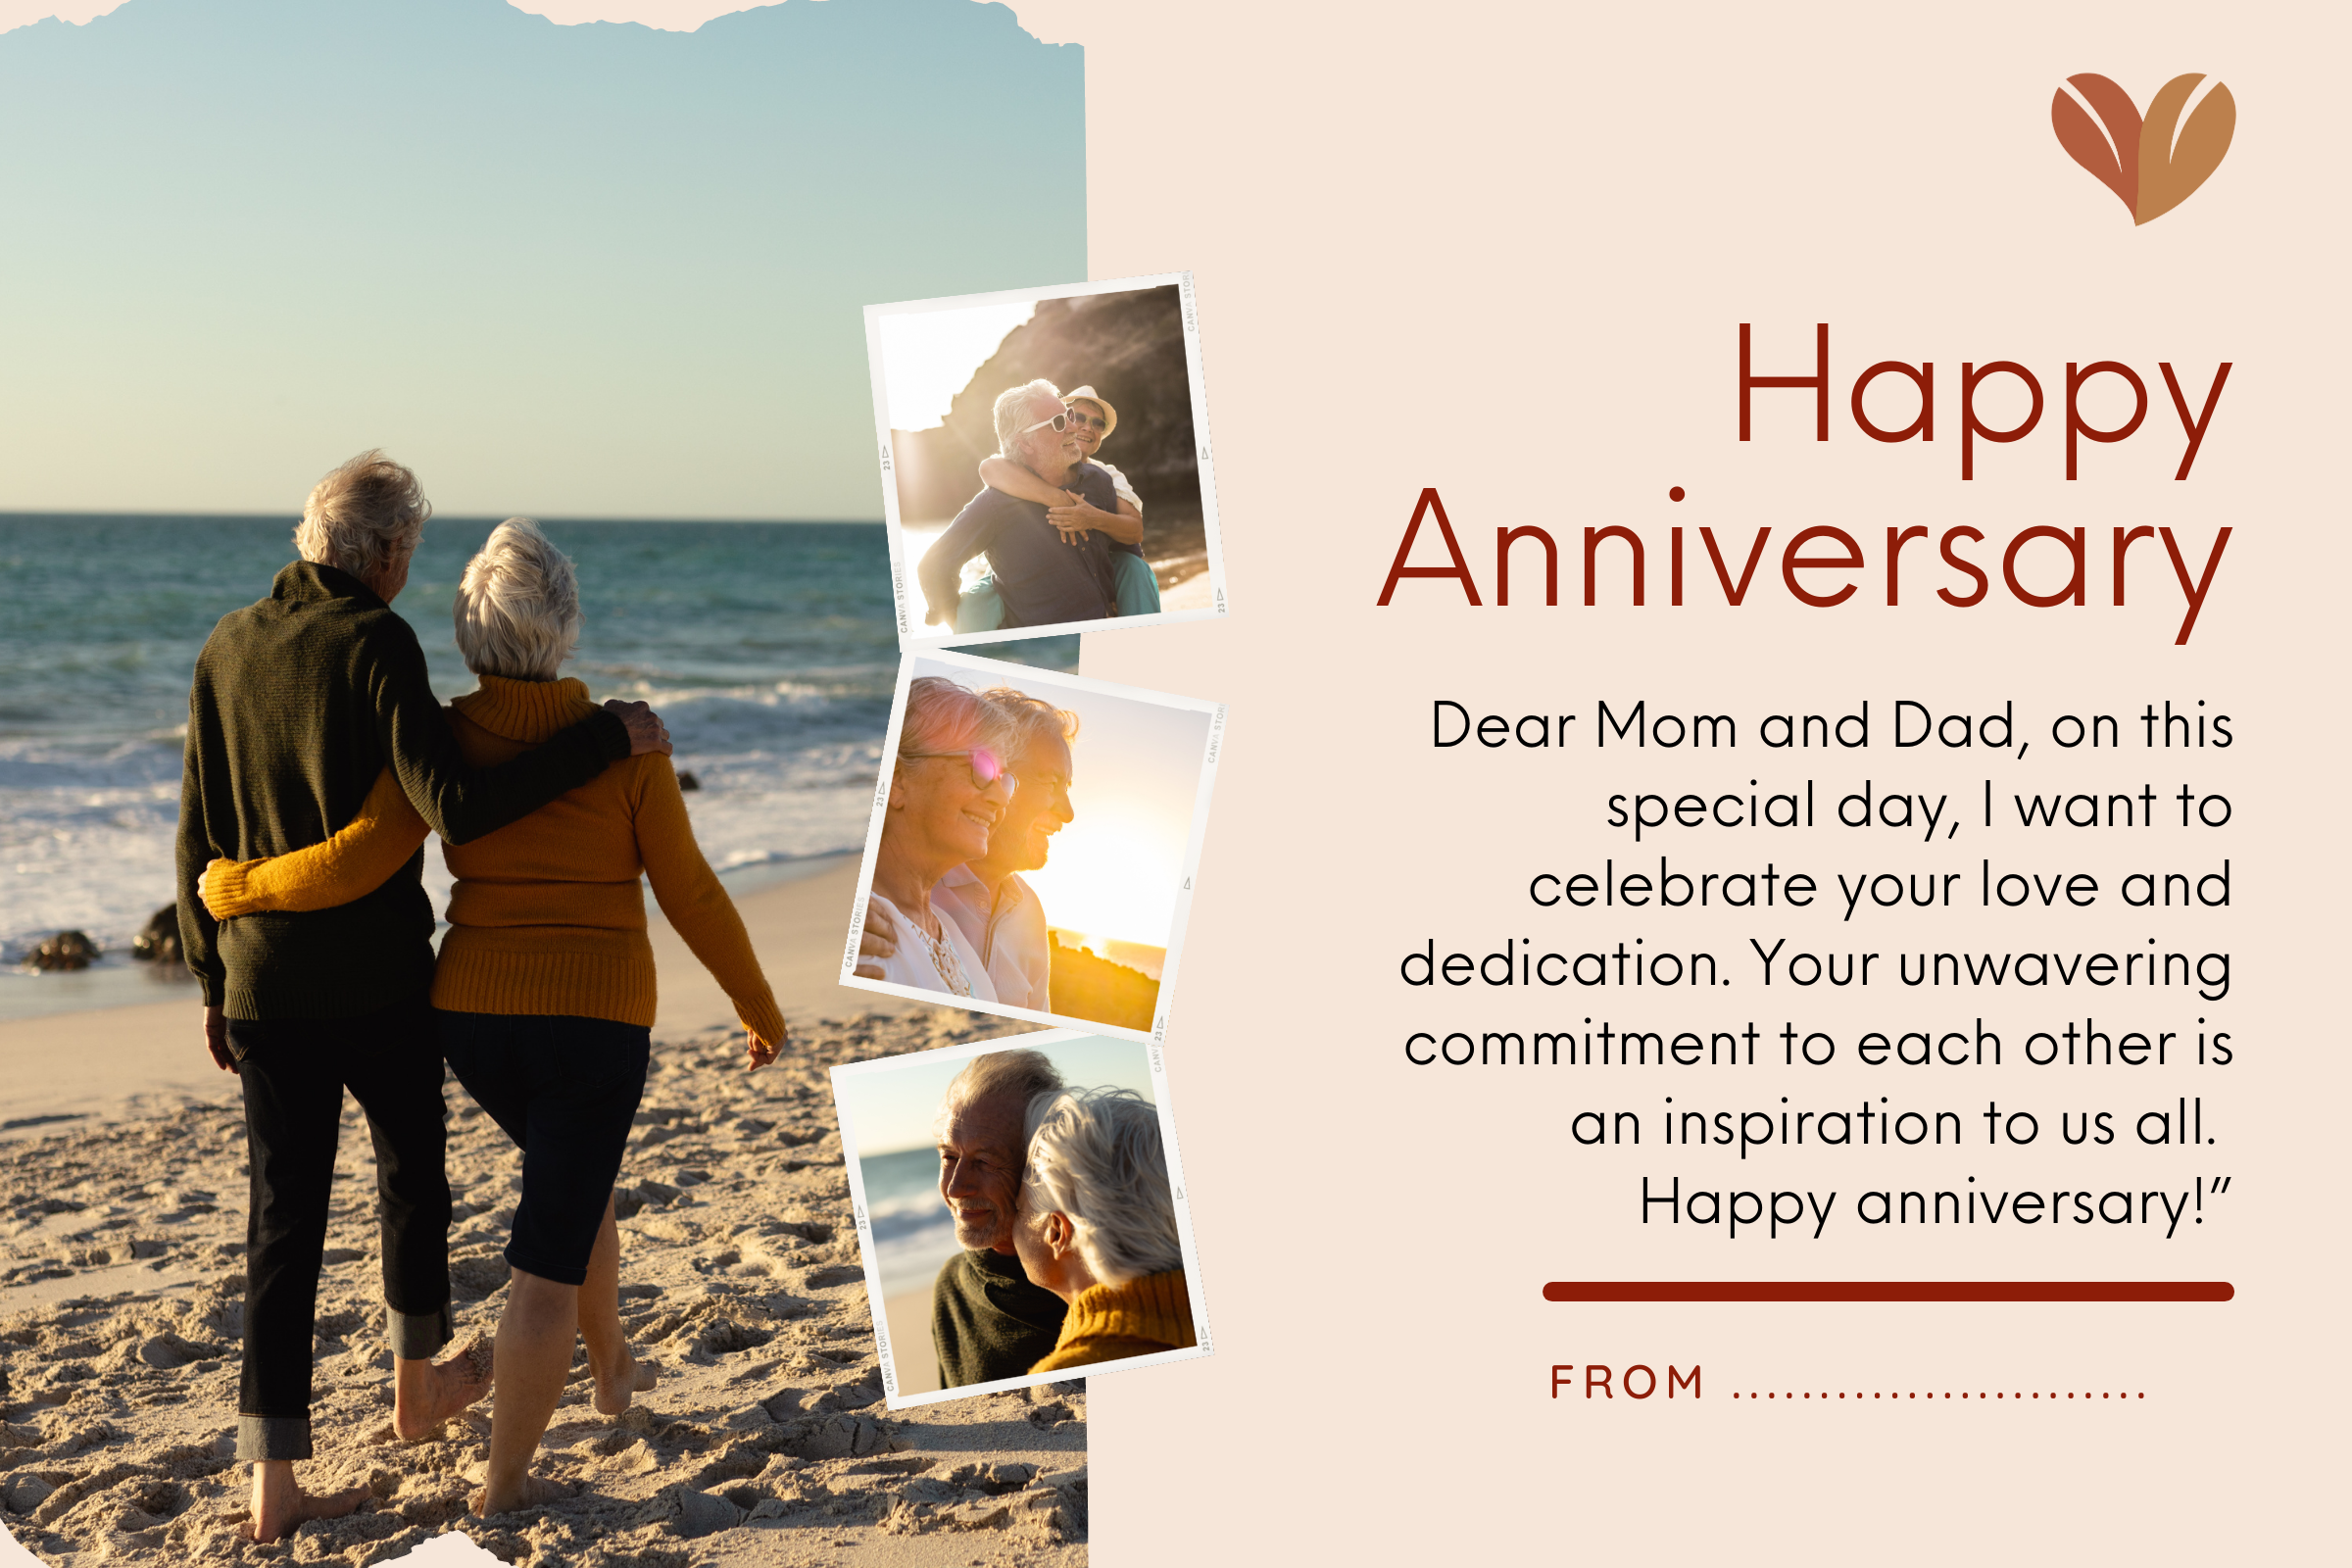 Sending happy anniversary parents wishes to those who raised us